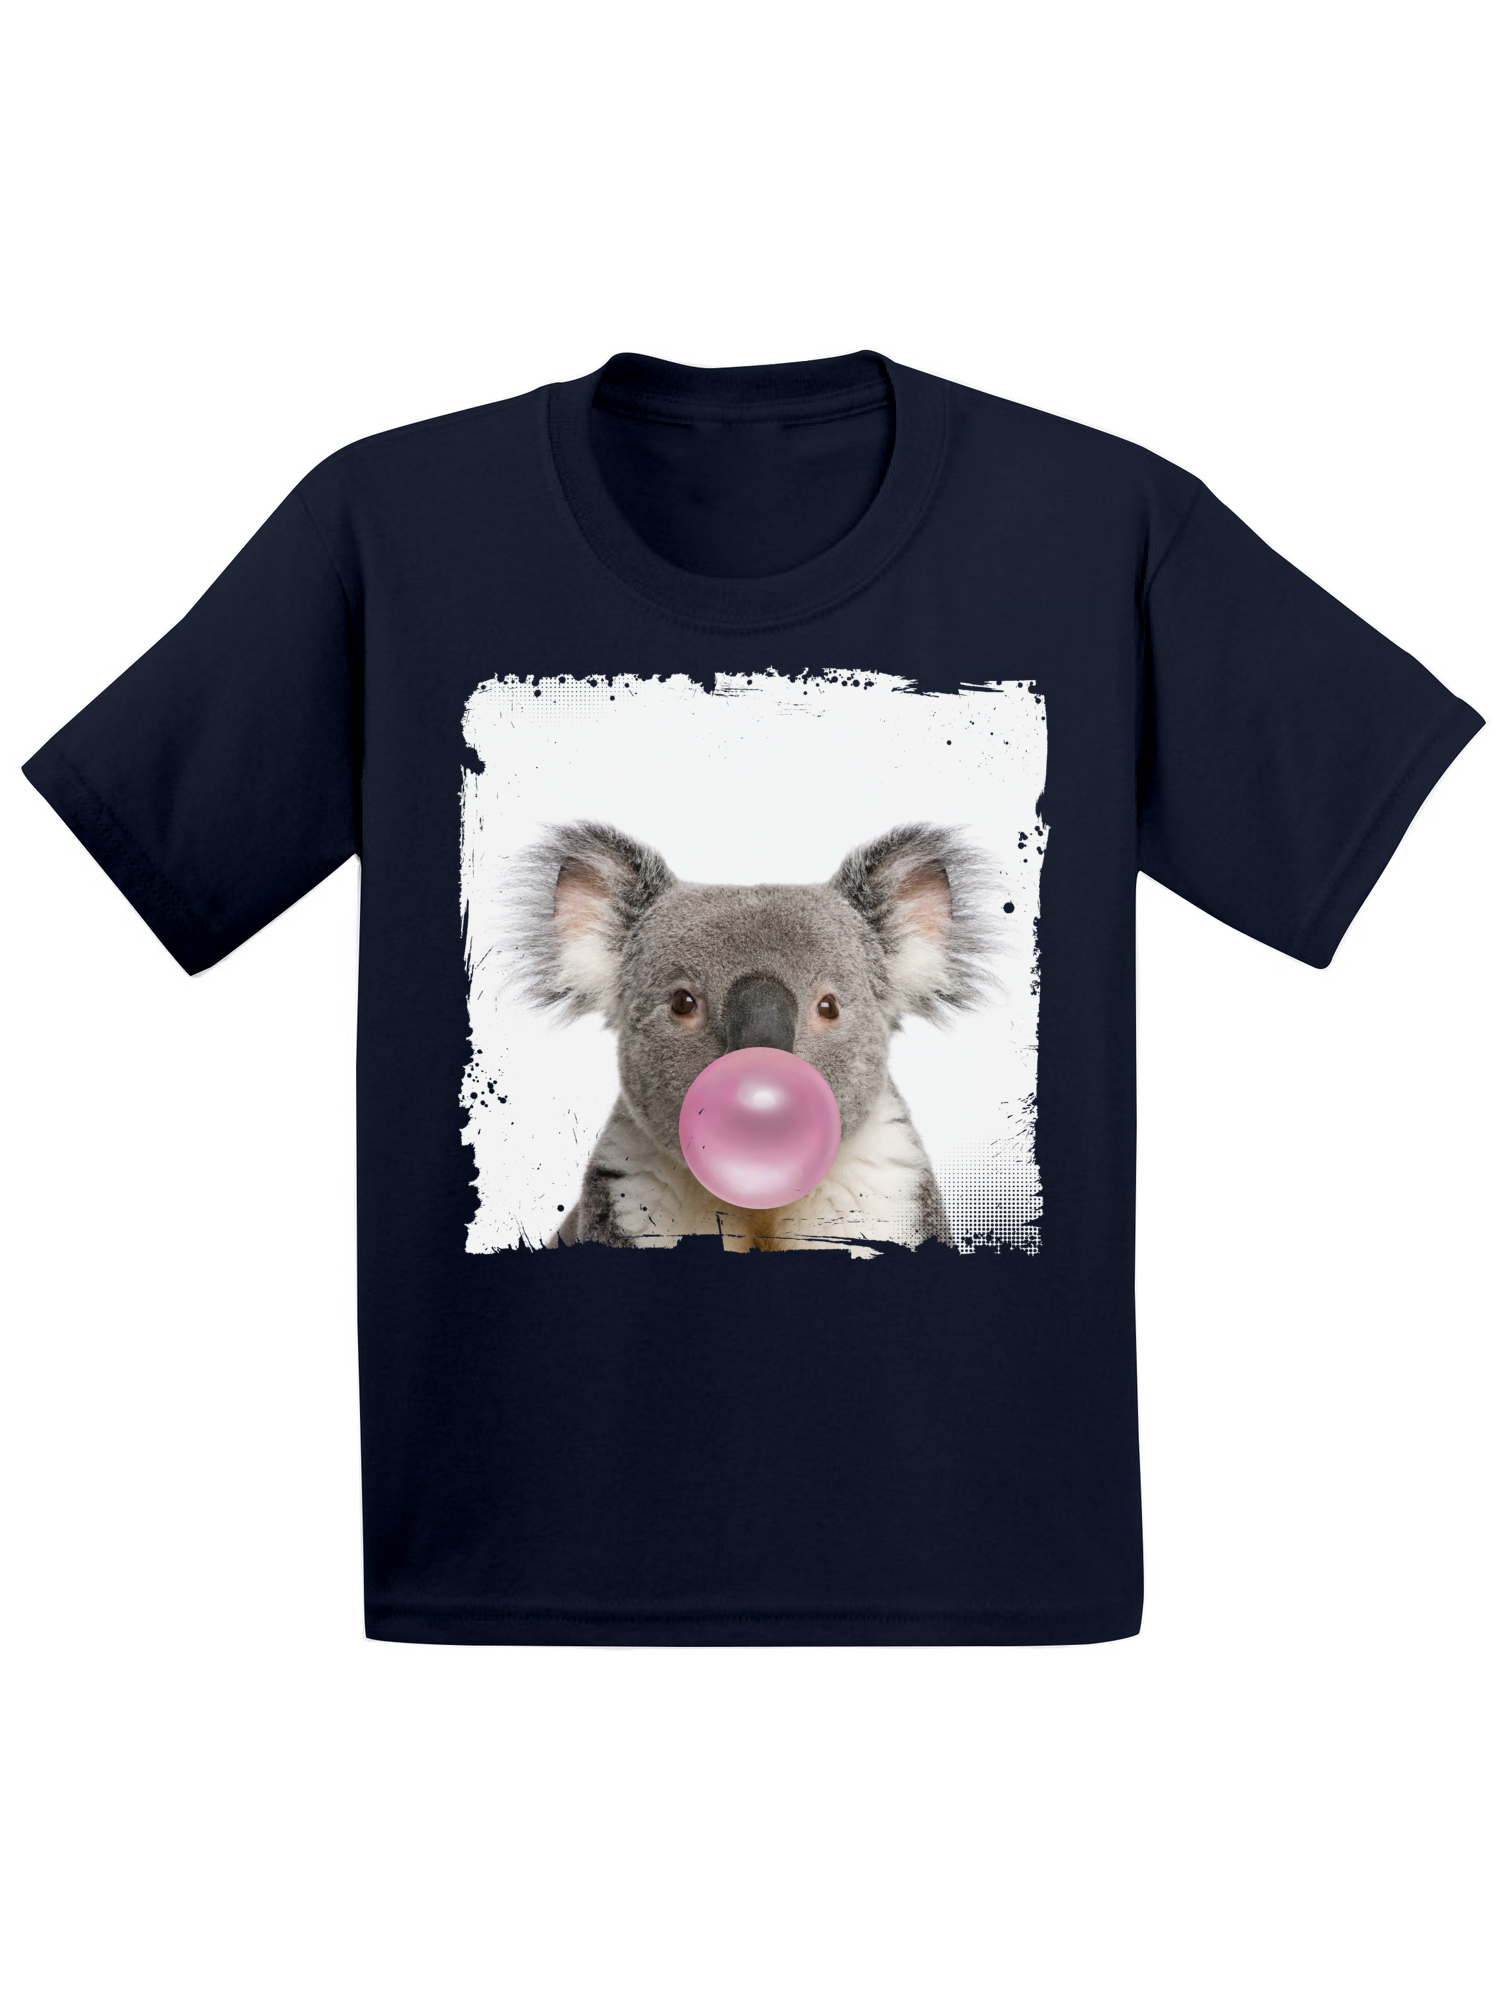 Awkward Styles Cute Animal Themed Collection Funny Koala with Gum Nifty Koala Clothing Koala Lovers Funny Gifts for Kids Childrens Outfit Koala Tshirt Koala Toddler Shirt Toddler T Shirt for Kids - image 1 of 4